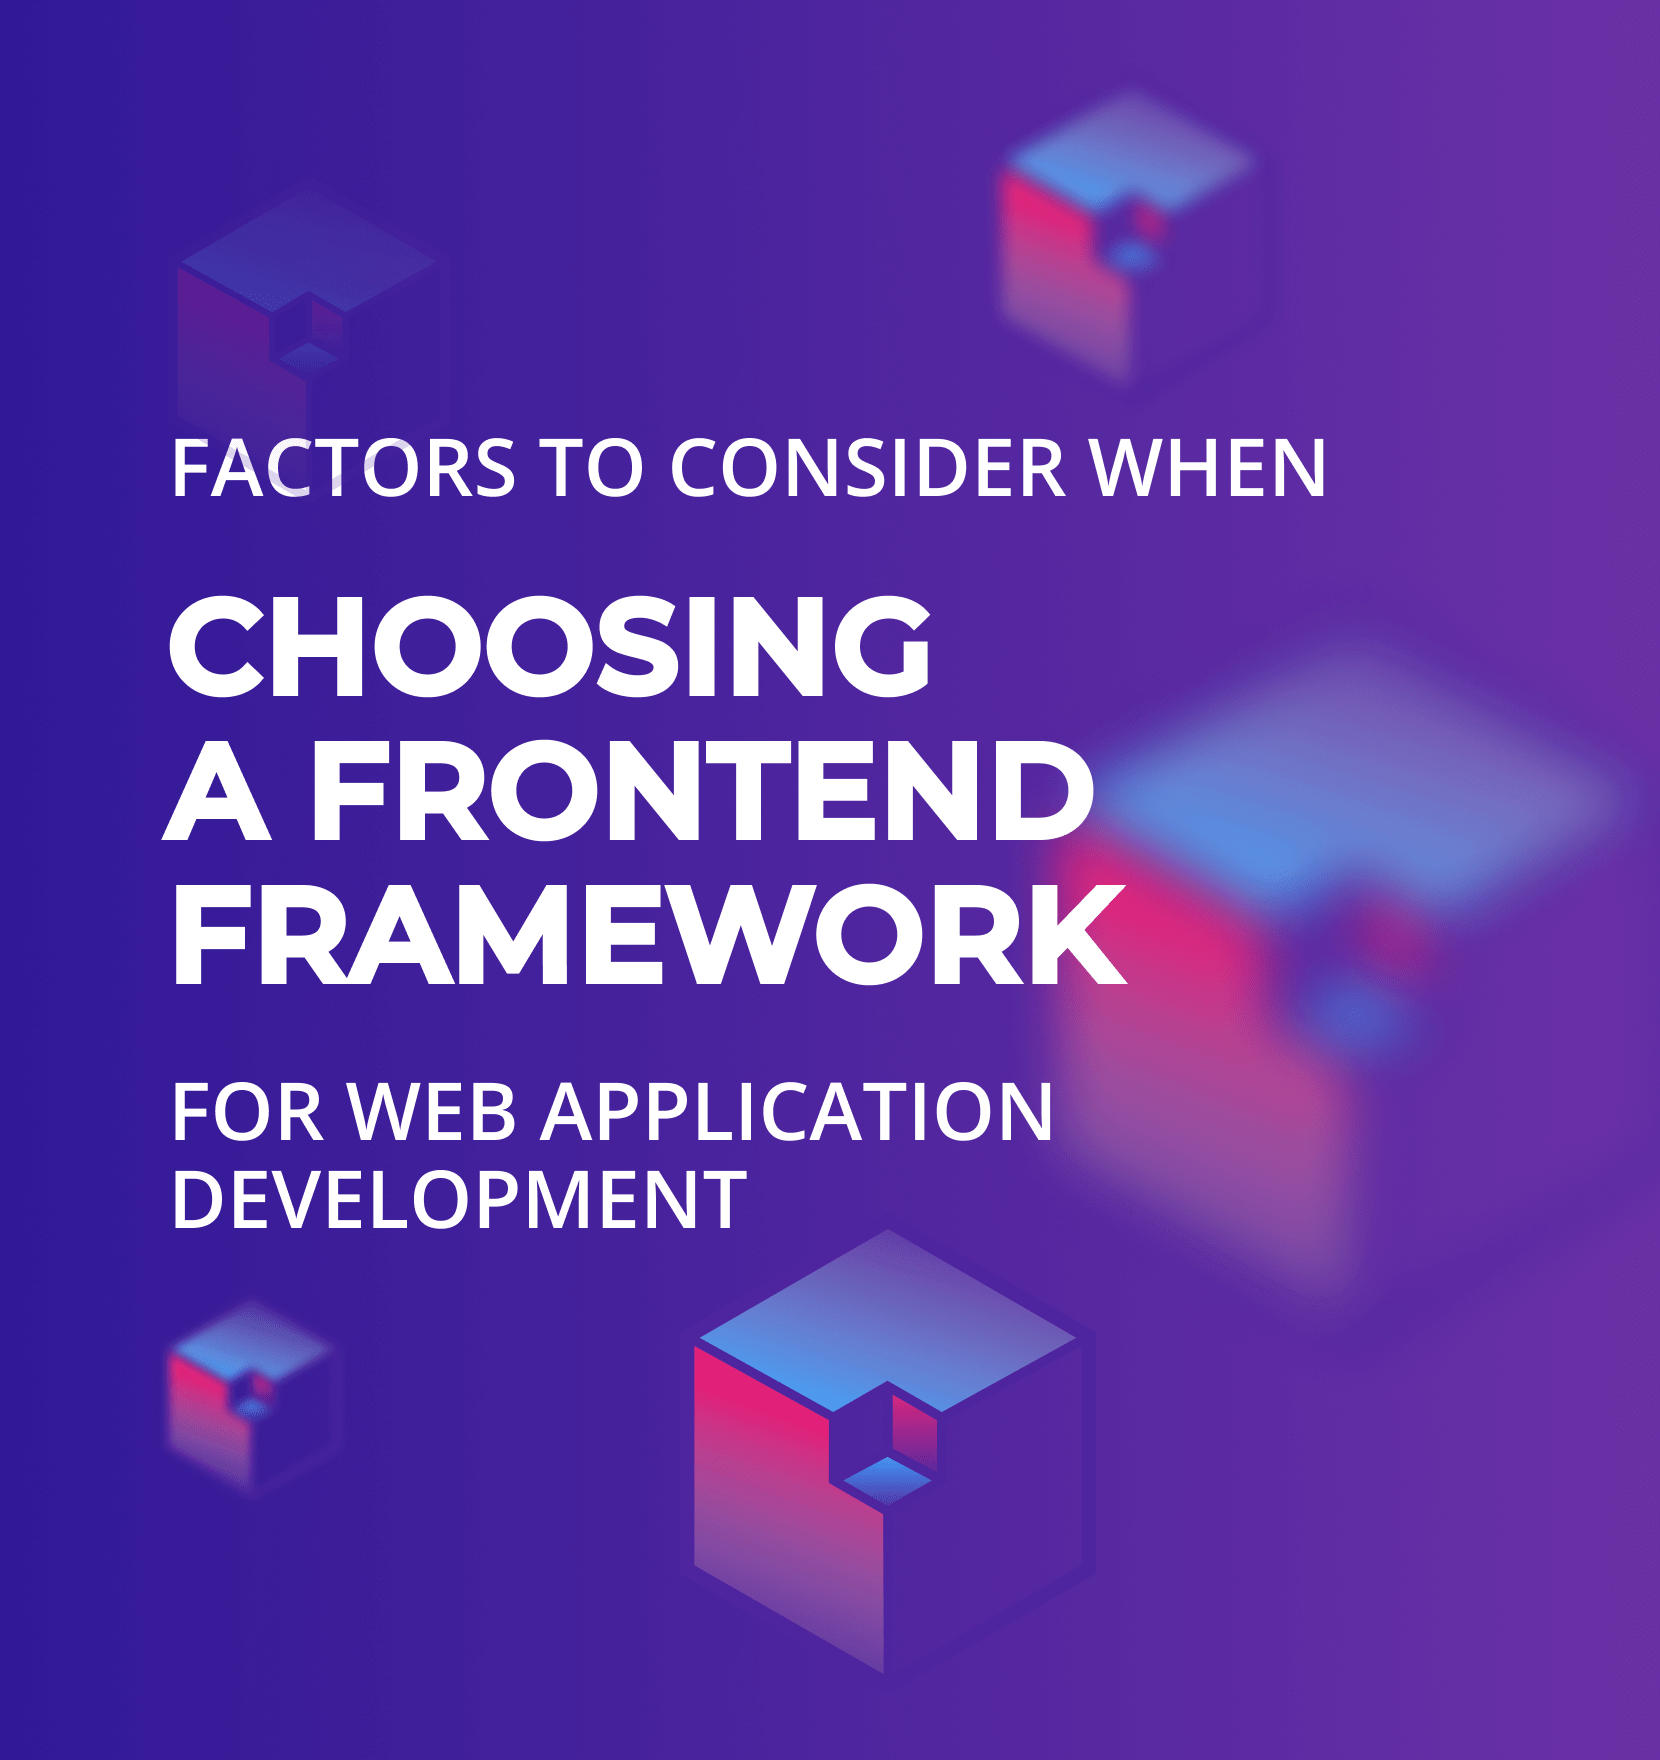 Factors to consider when choosing a frontend framework for web application